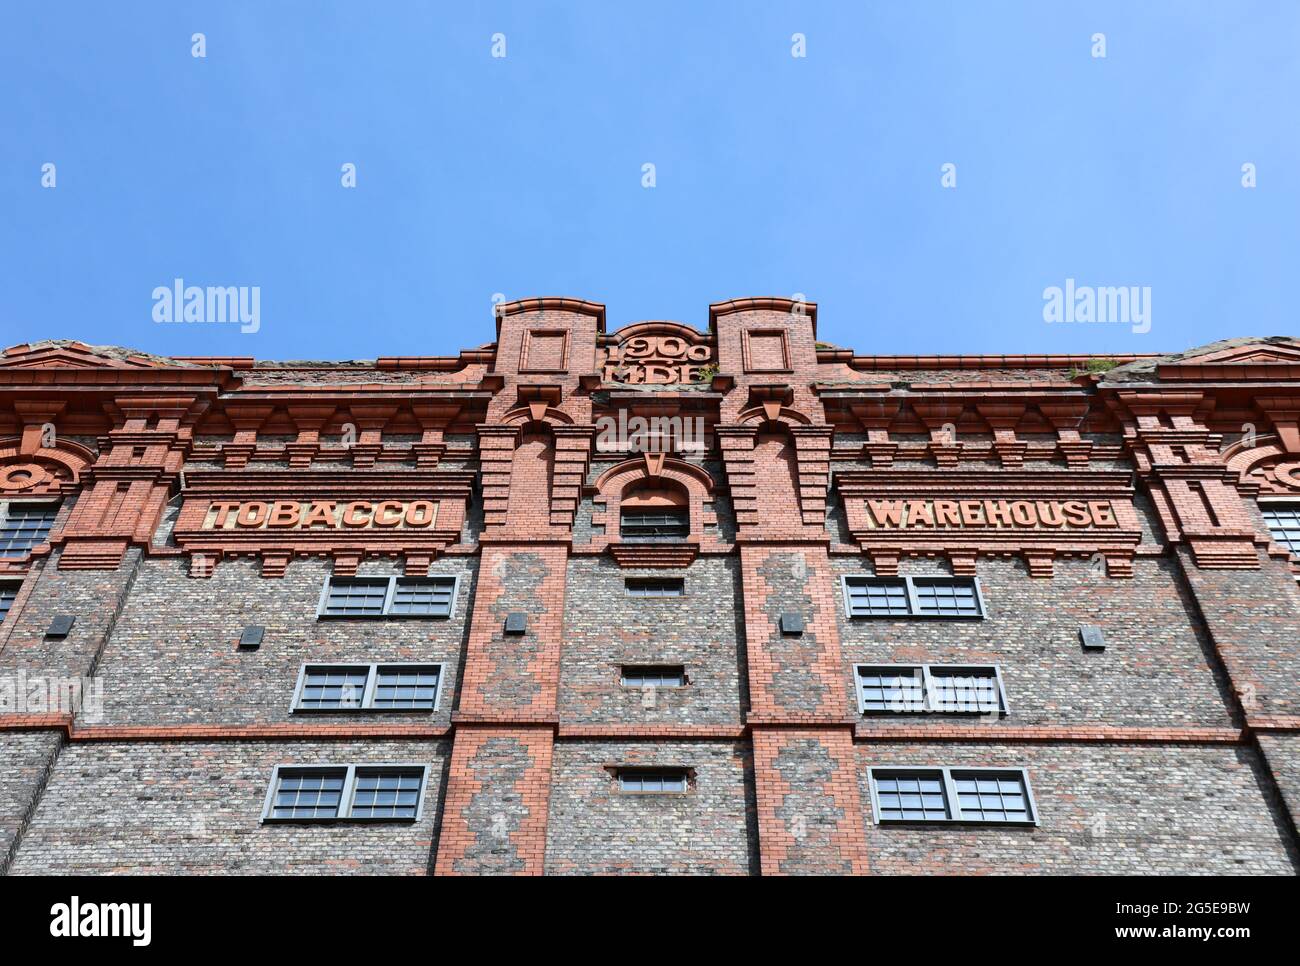 Historic Tobacco Warehouse in Liverpool dated 1900 Stock Photo